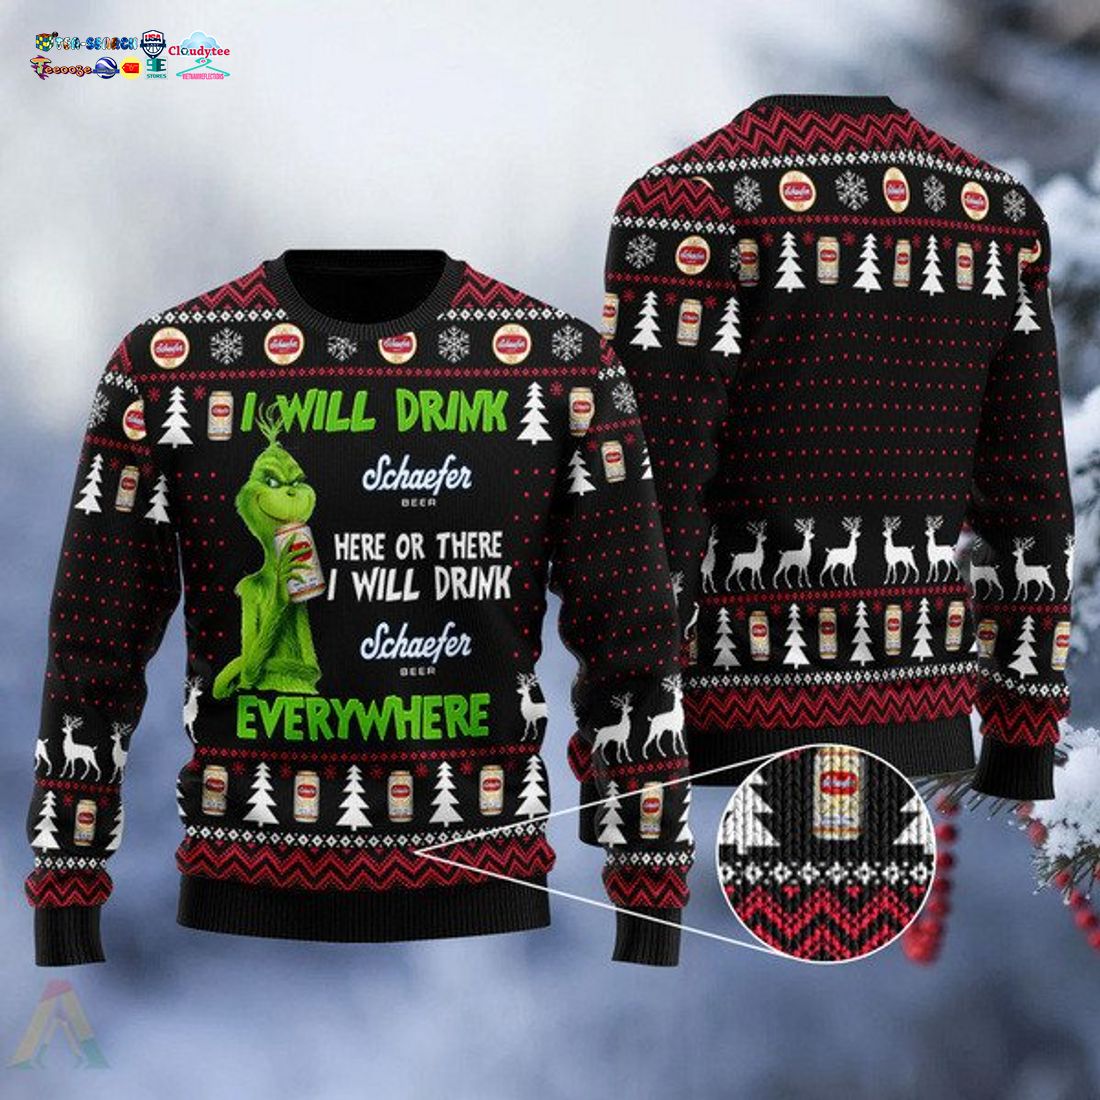 Grinch I Will Drink Schaefer Everywhere Ugly Christmas Sweater